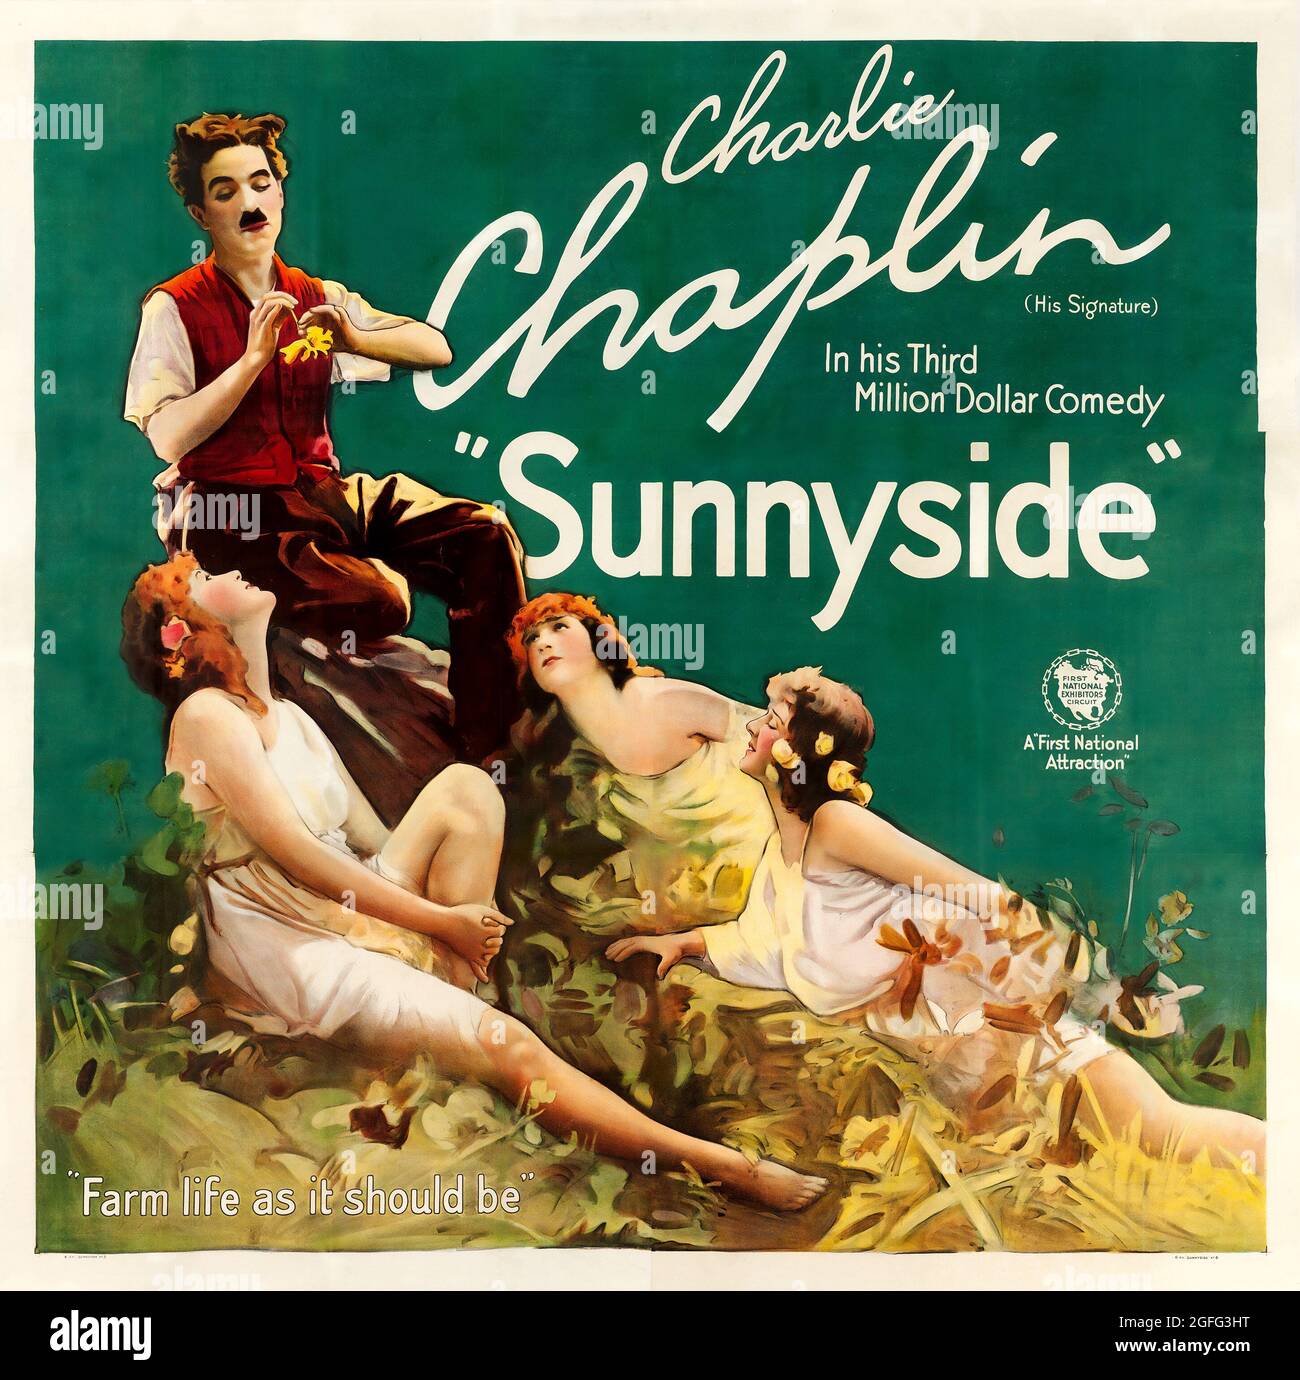 Movie poster: Charlie Chaplin in Sunnyside (Comedy / Silent film / First National, 1919). Stock Photo